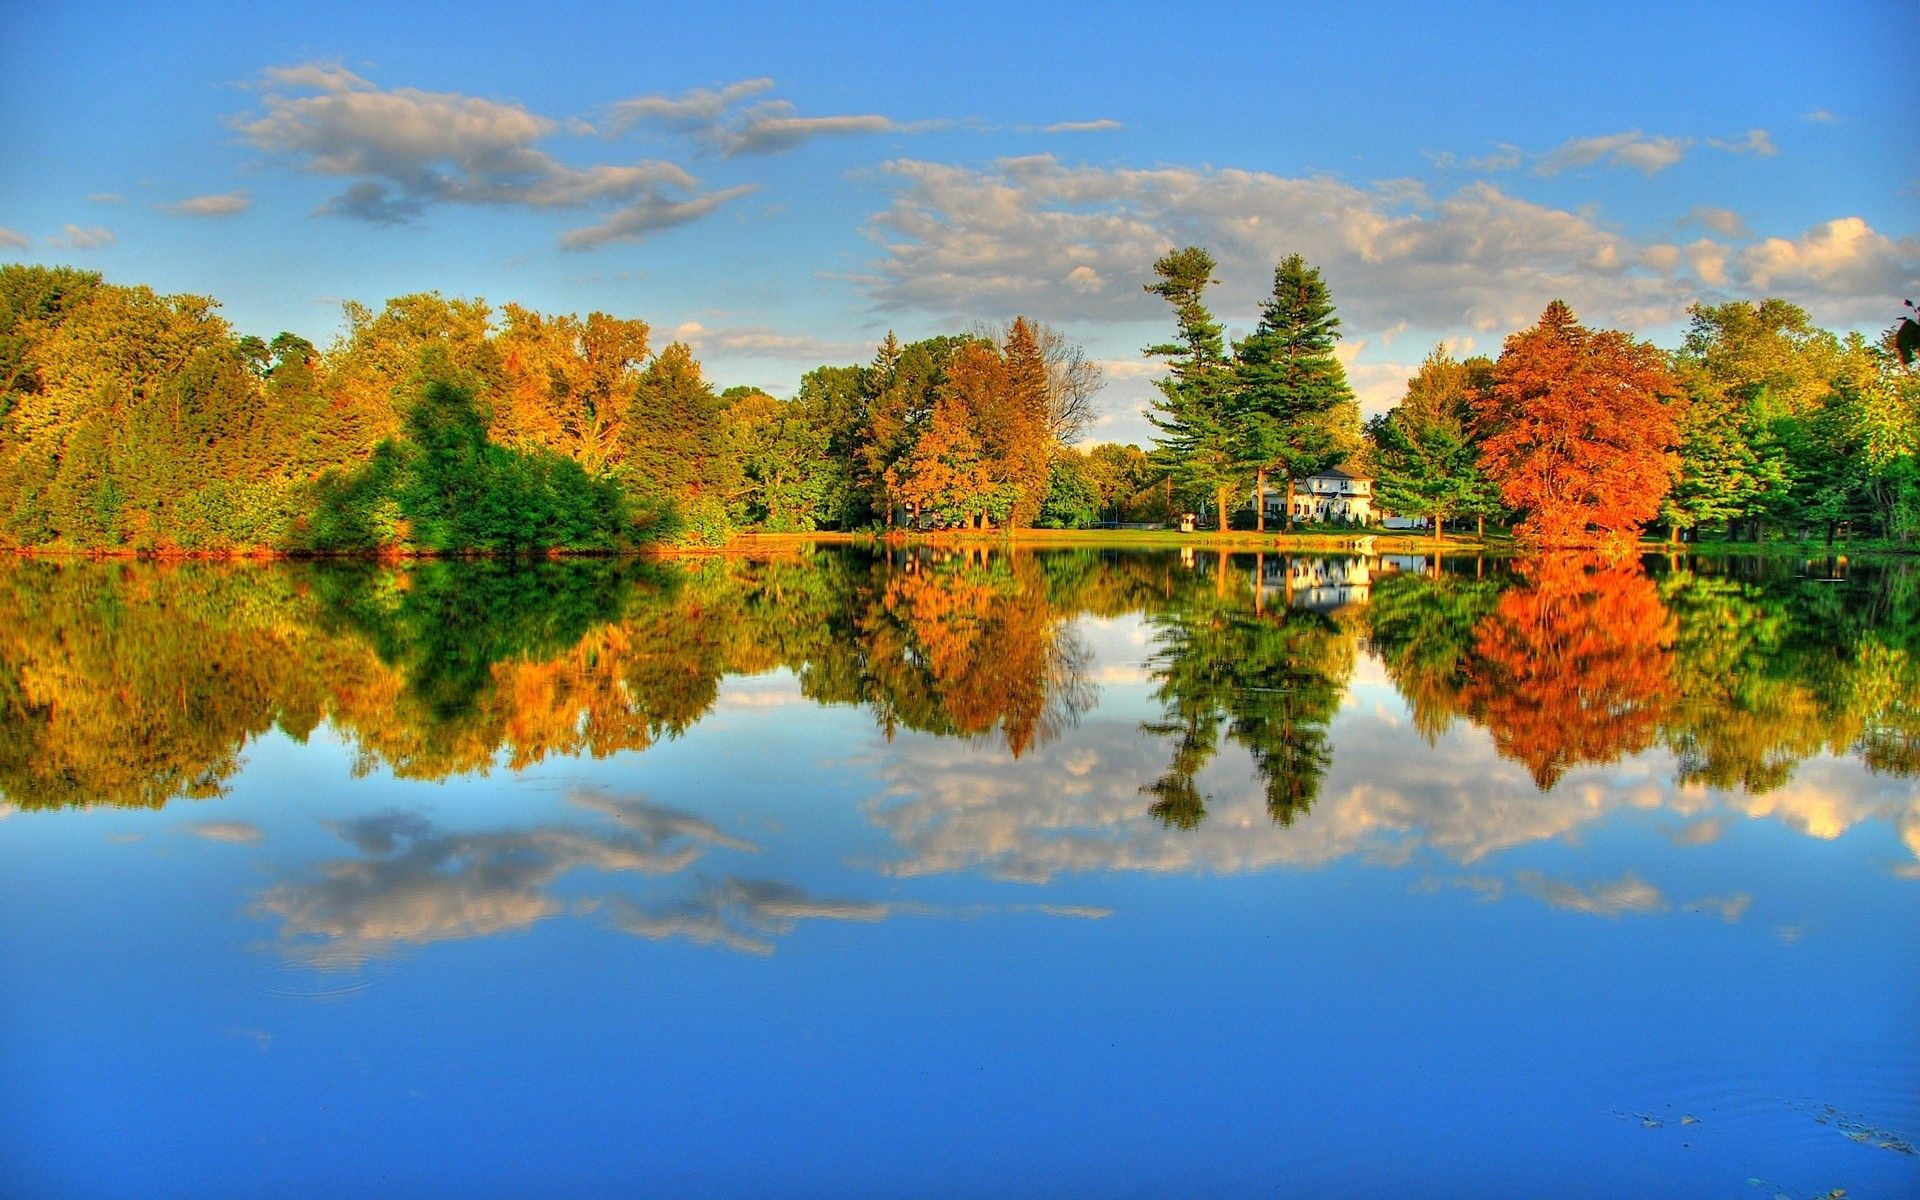 android lake, autumn, nature, trees, reflection, shore, bank, house, colors, color